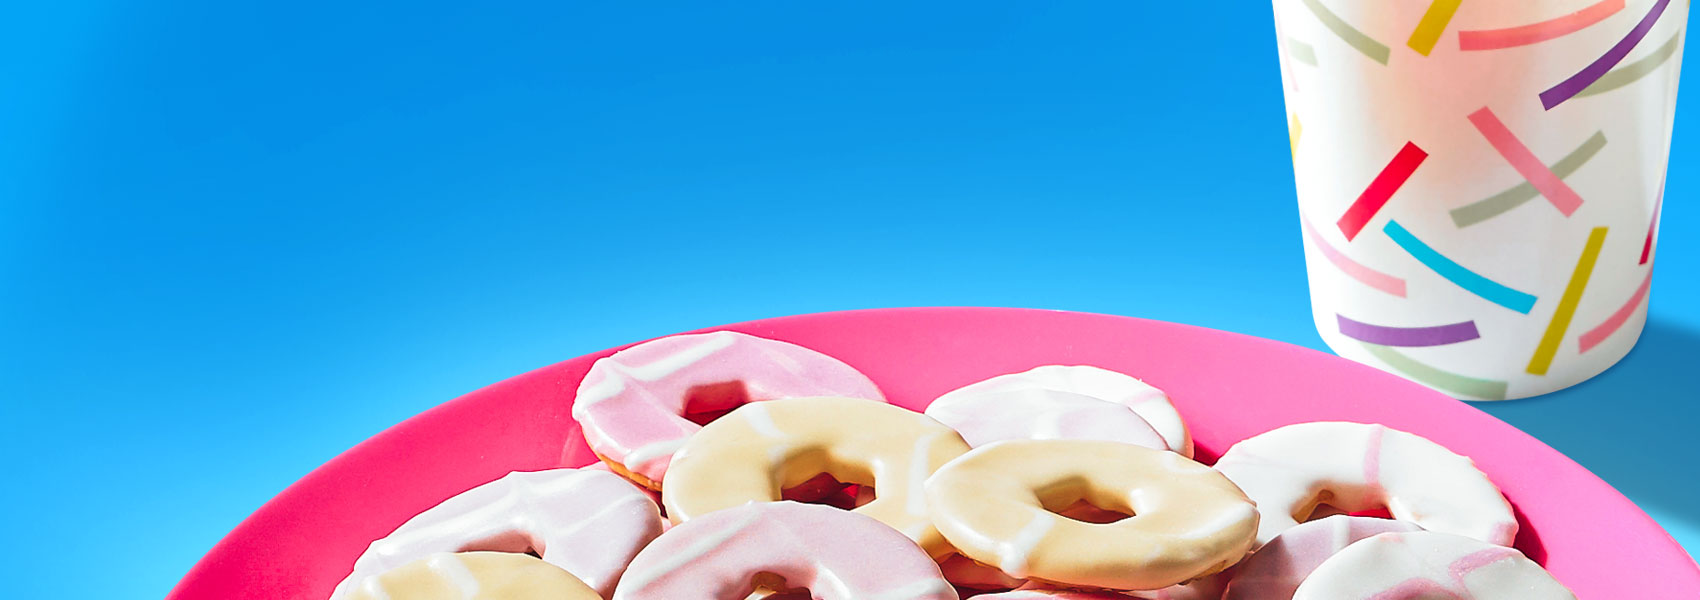 Halal or Haram? - Party rings are now suitable for vegetarians | Facebook